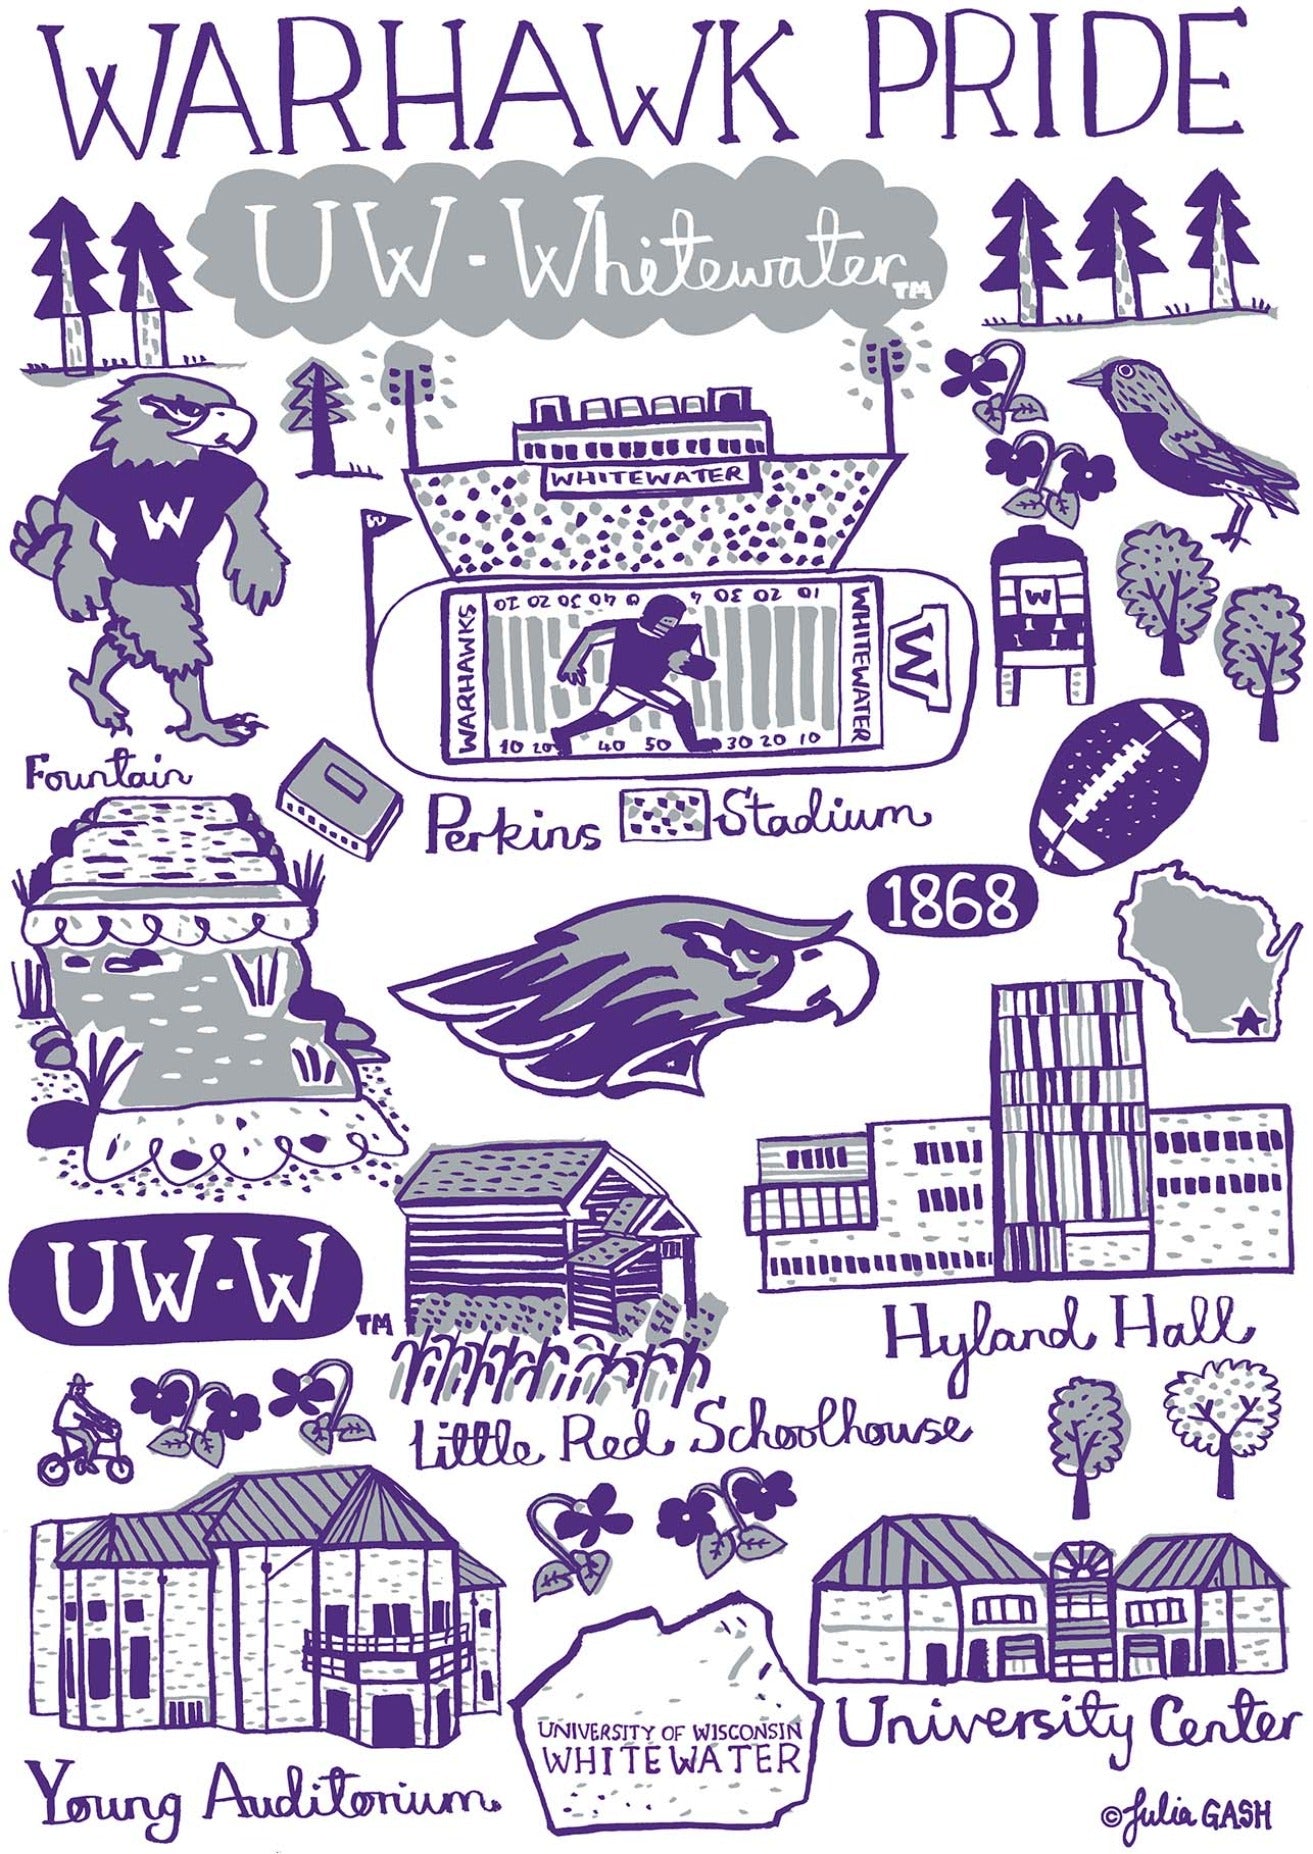 University of Wisconsin - Whitewater by Julia Gash